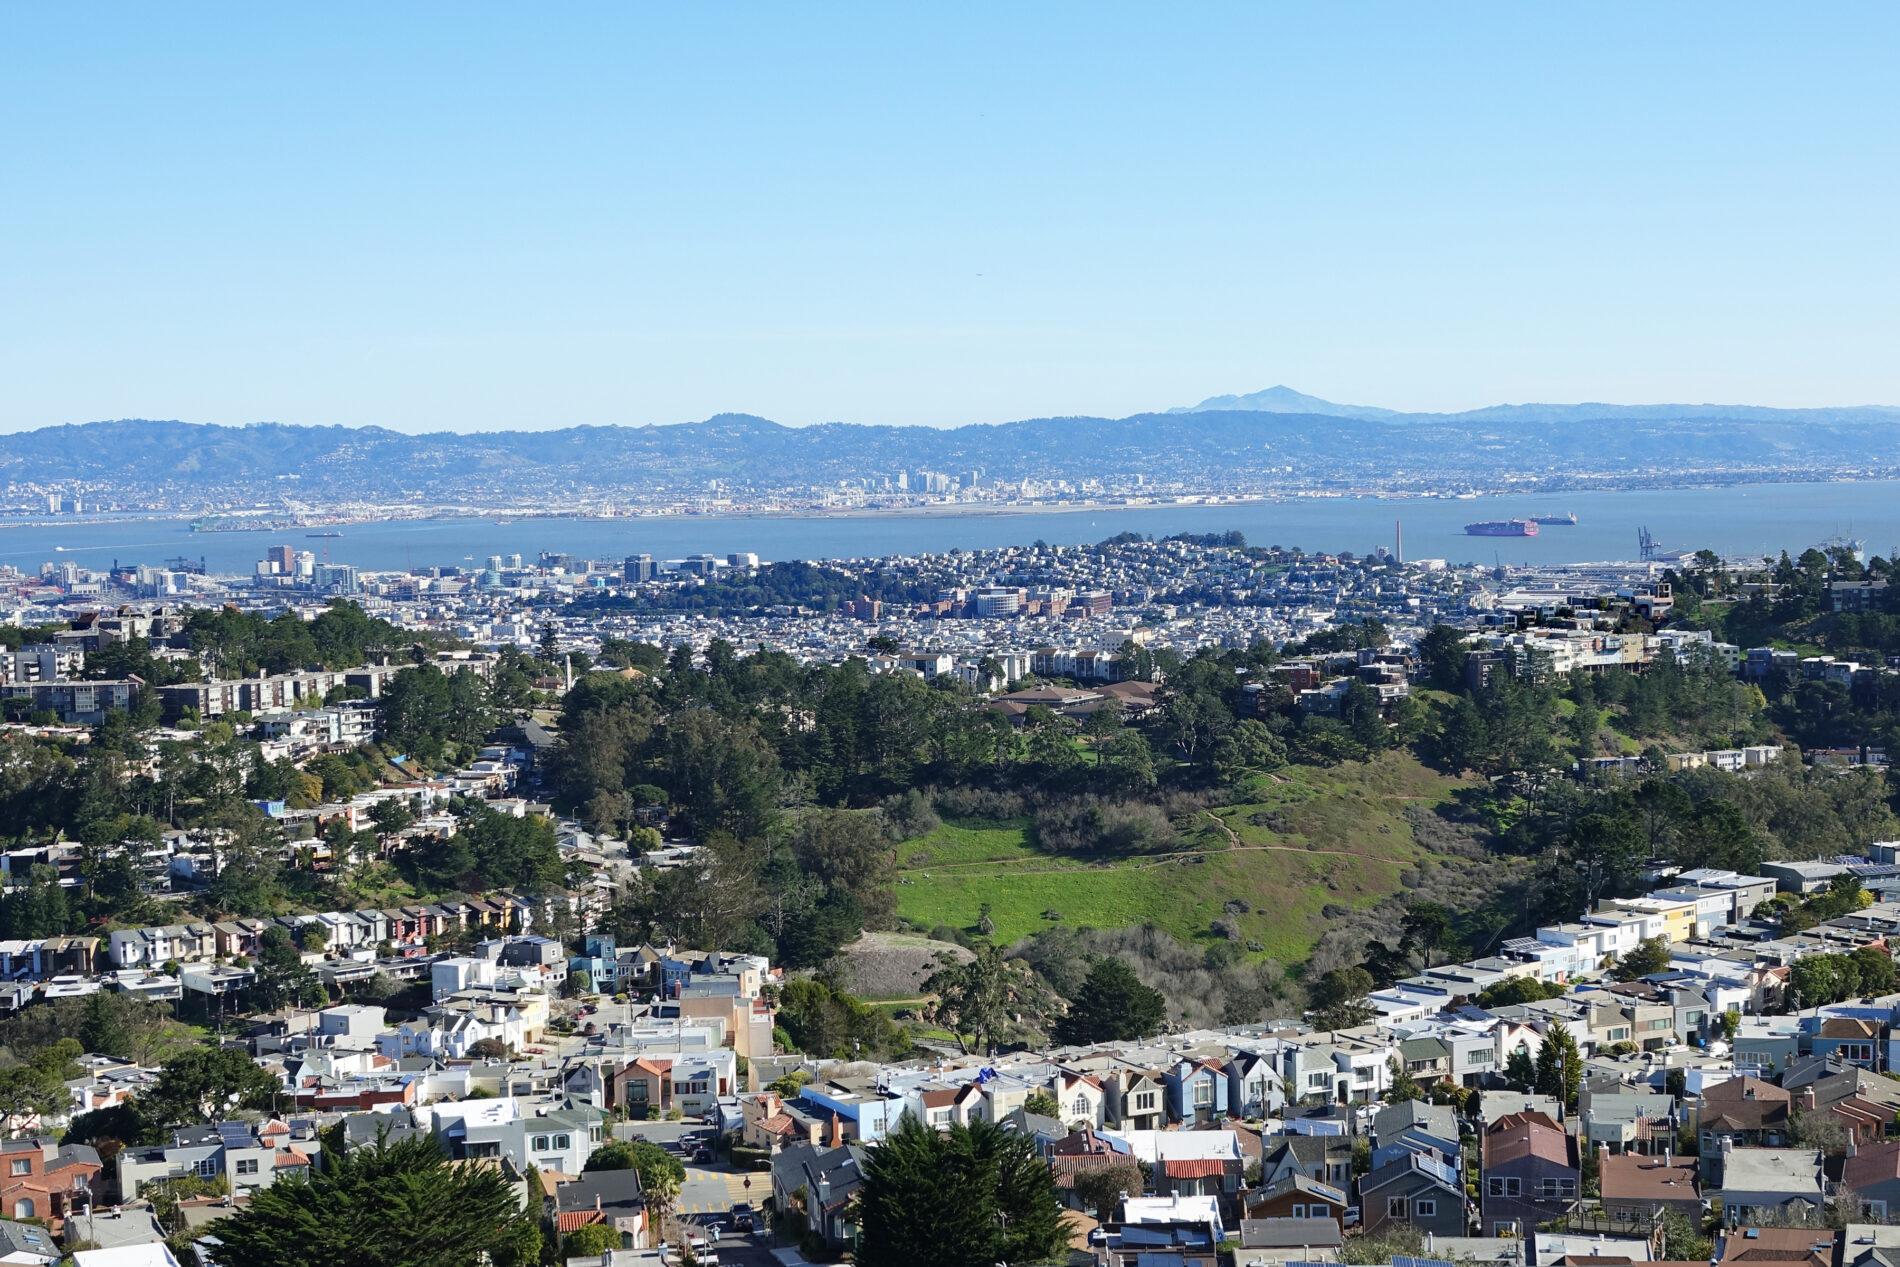 Overlooking part of San Francisco and the Bay from Mt. Davidson vista point.